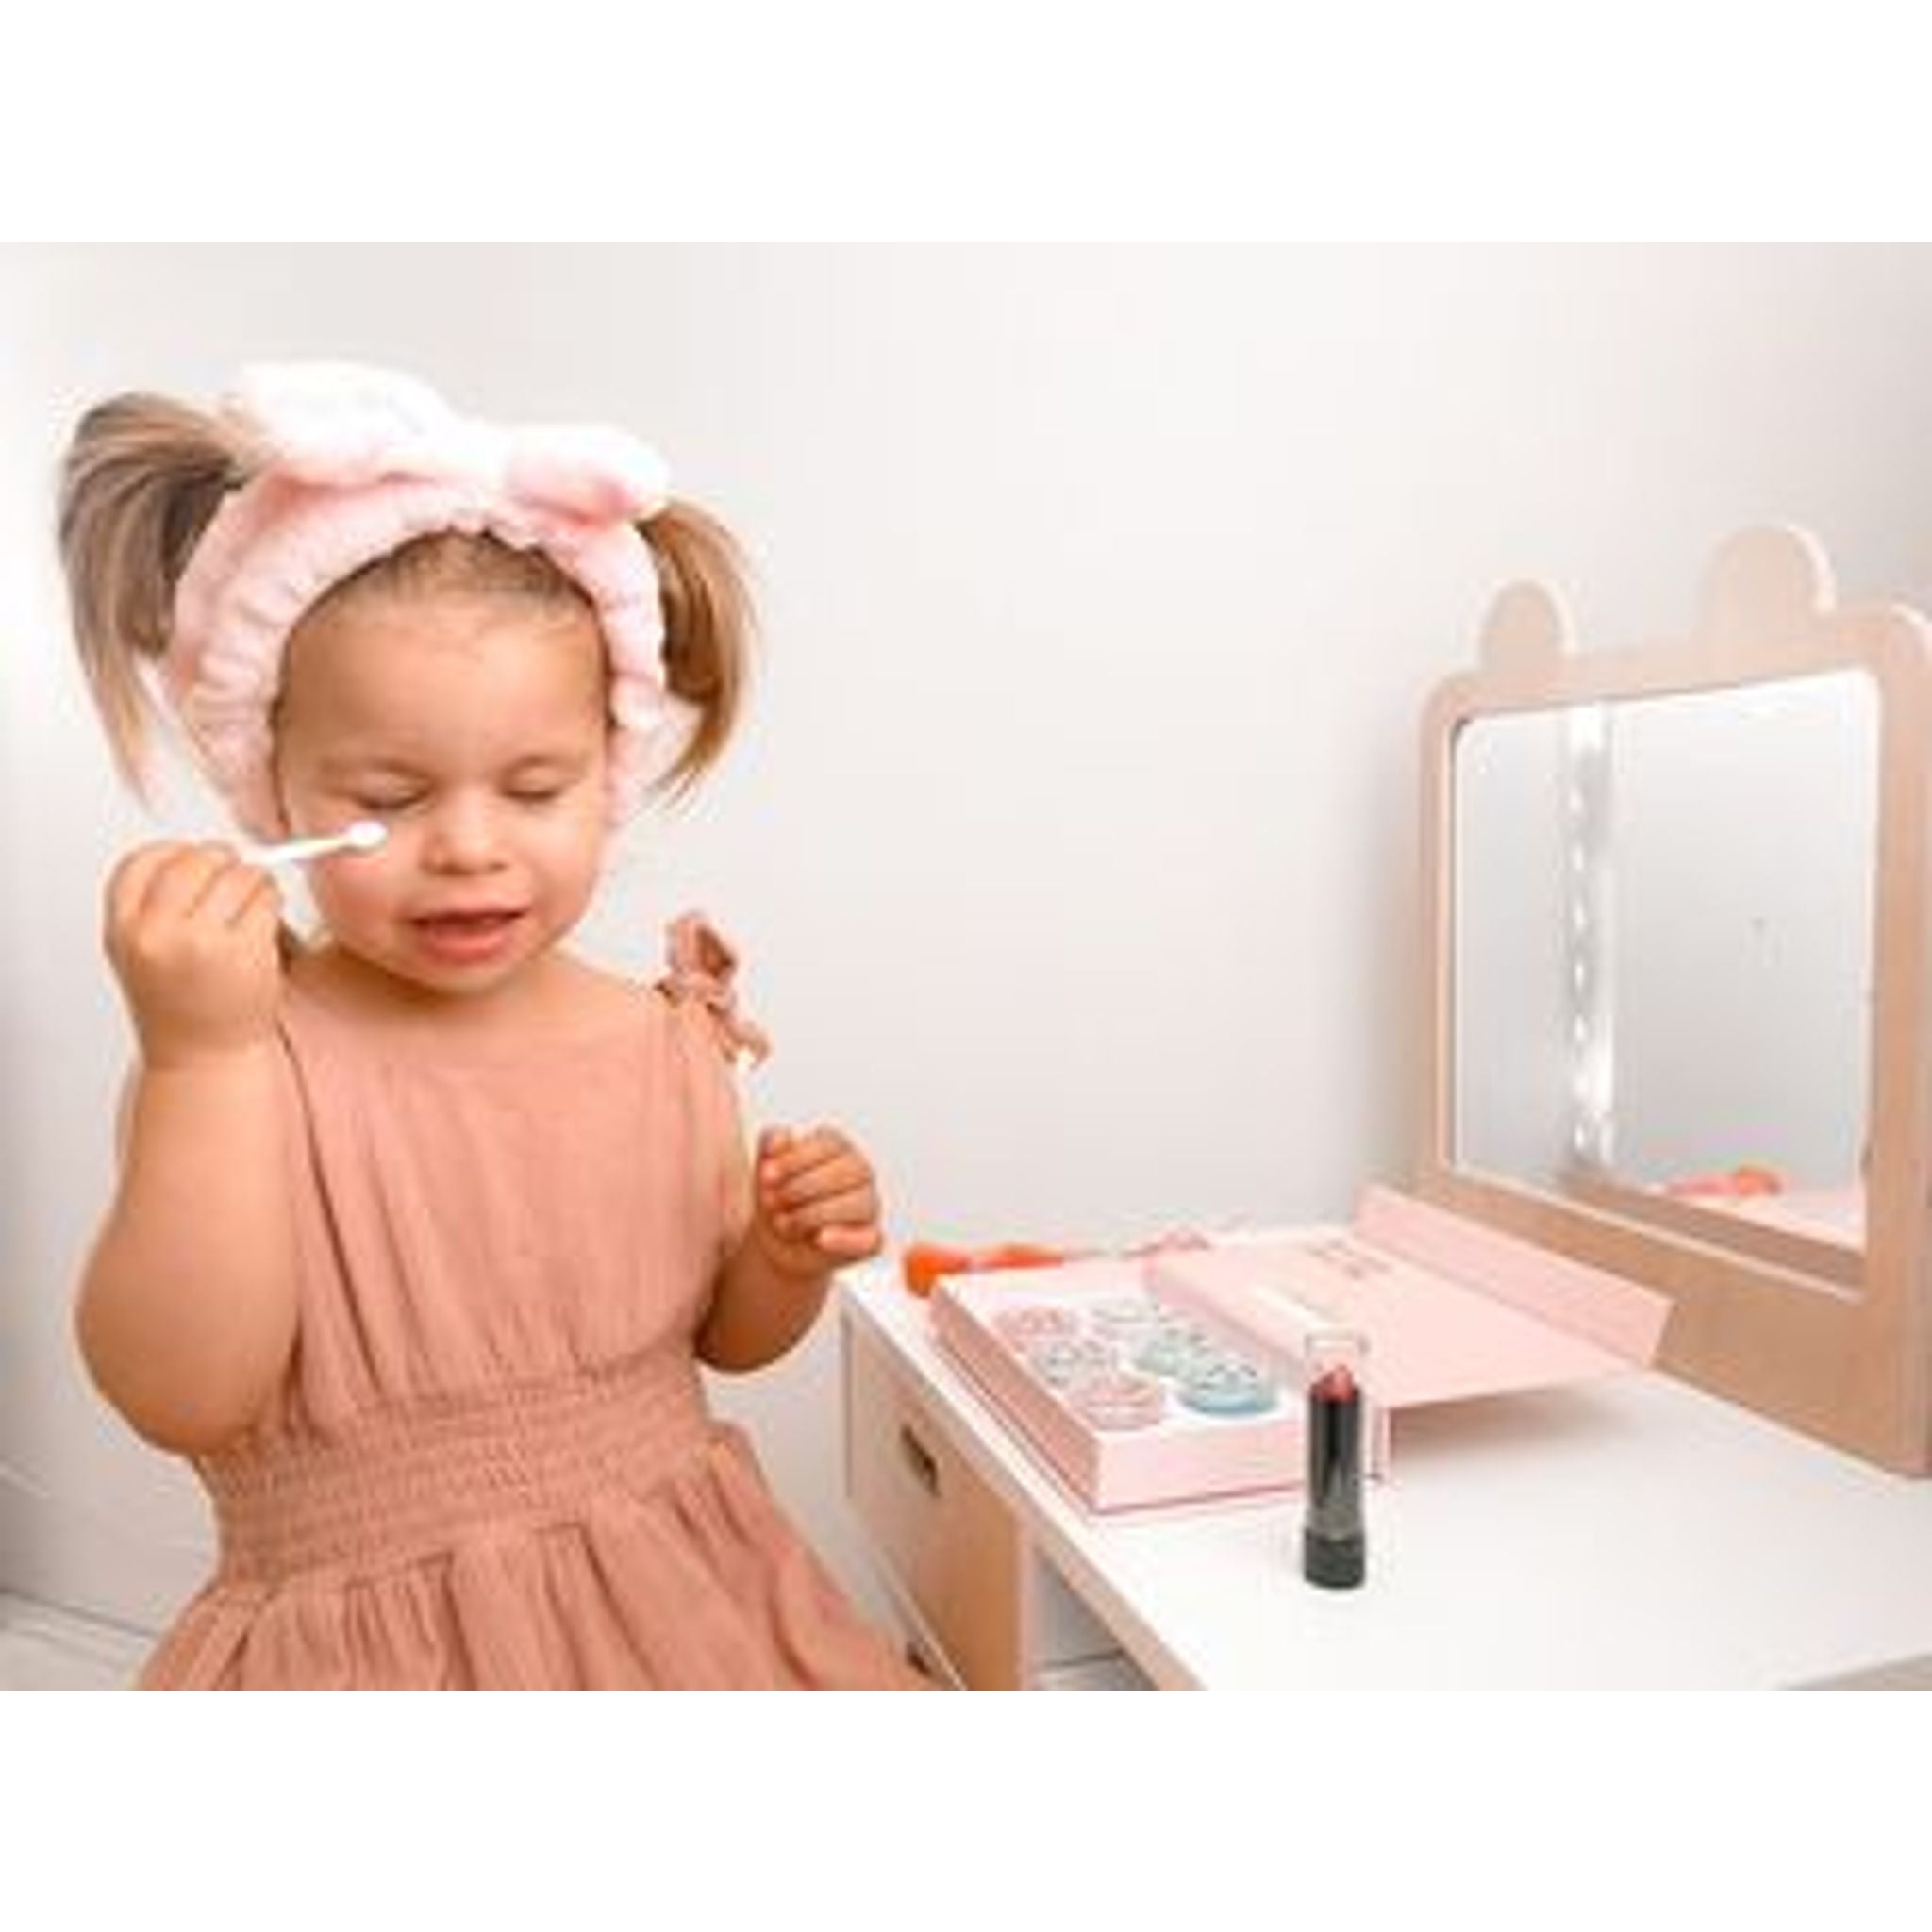 Oh Flossy Deluxe Makeup Set - Toybox Tales